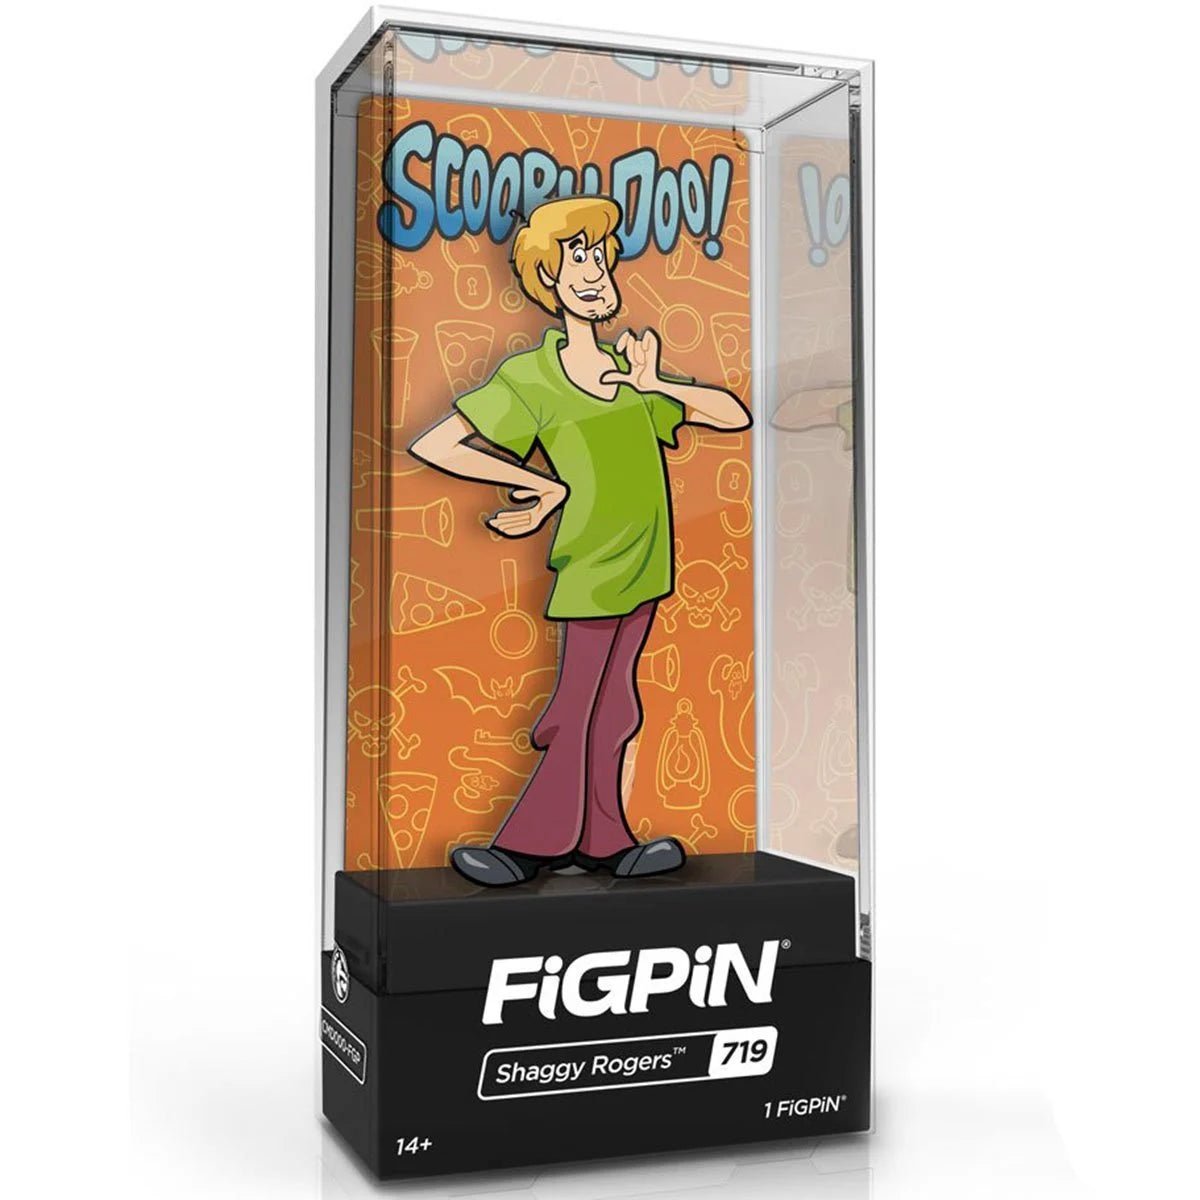 Scooby-Doo Shaggy Rogers FiGPiN Classic 3-Inch Enamel Pin #719 - Simon's Collectibles